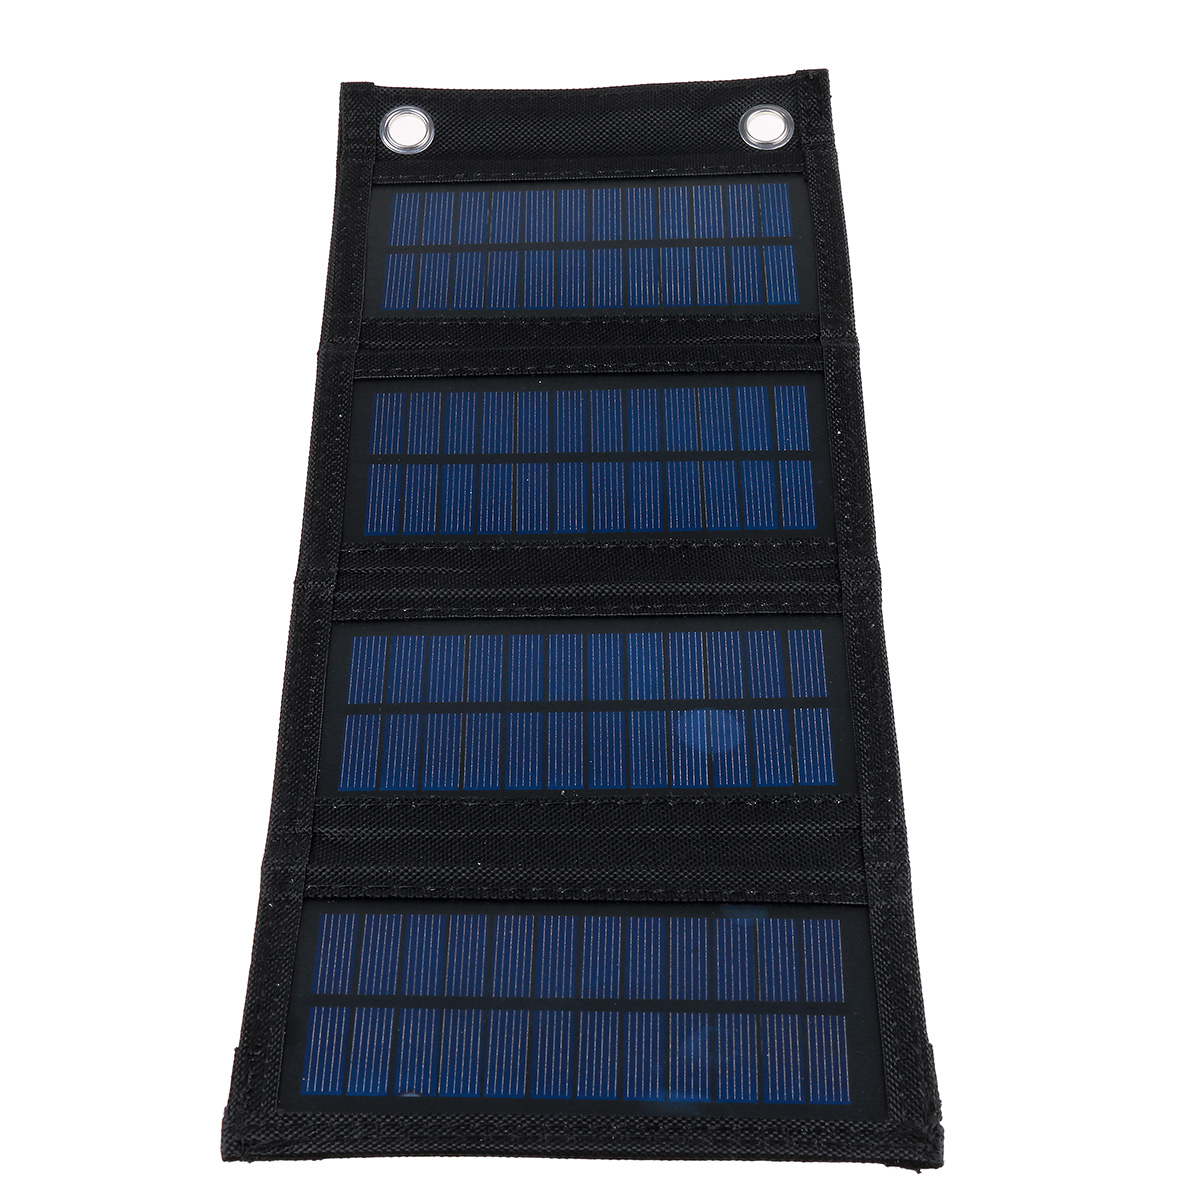 45W6W75W-Solar-Panel-Charger-USB-Output-5V-Waterproof-Backpack-Mobile-Power-Bank-1916087-7